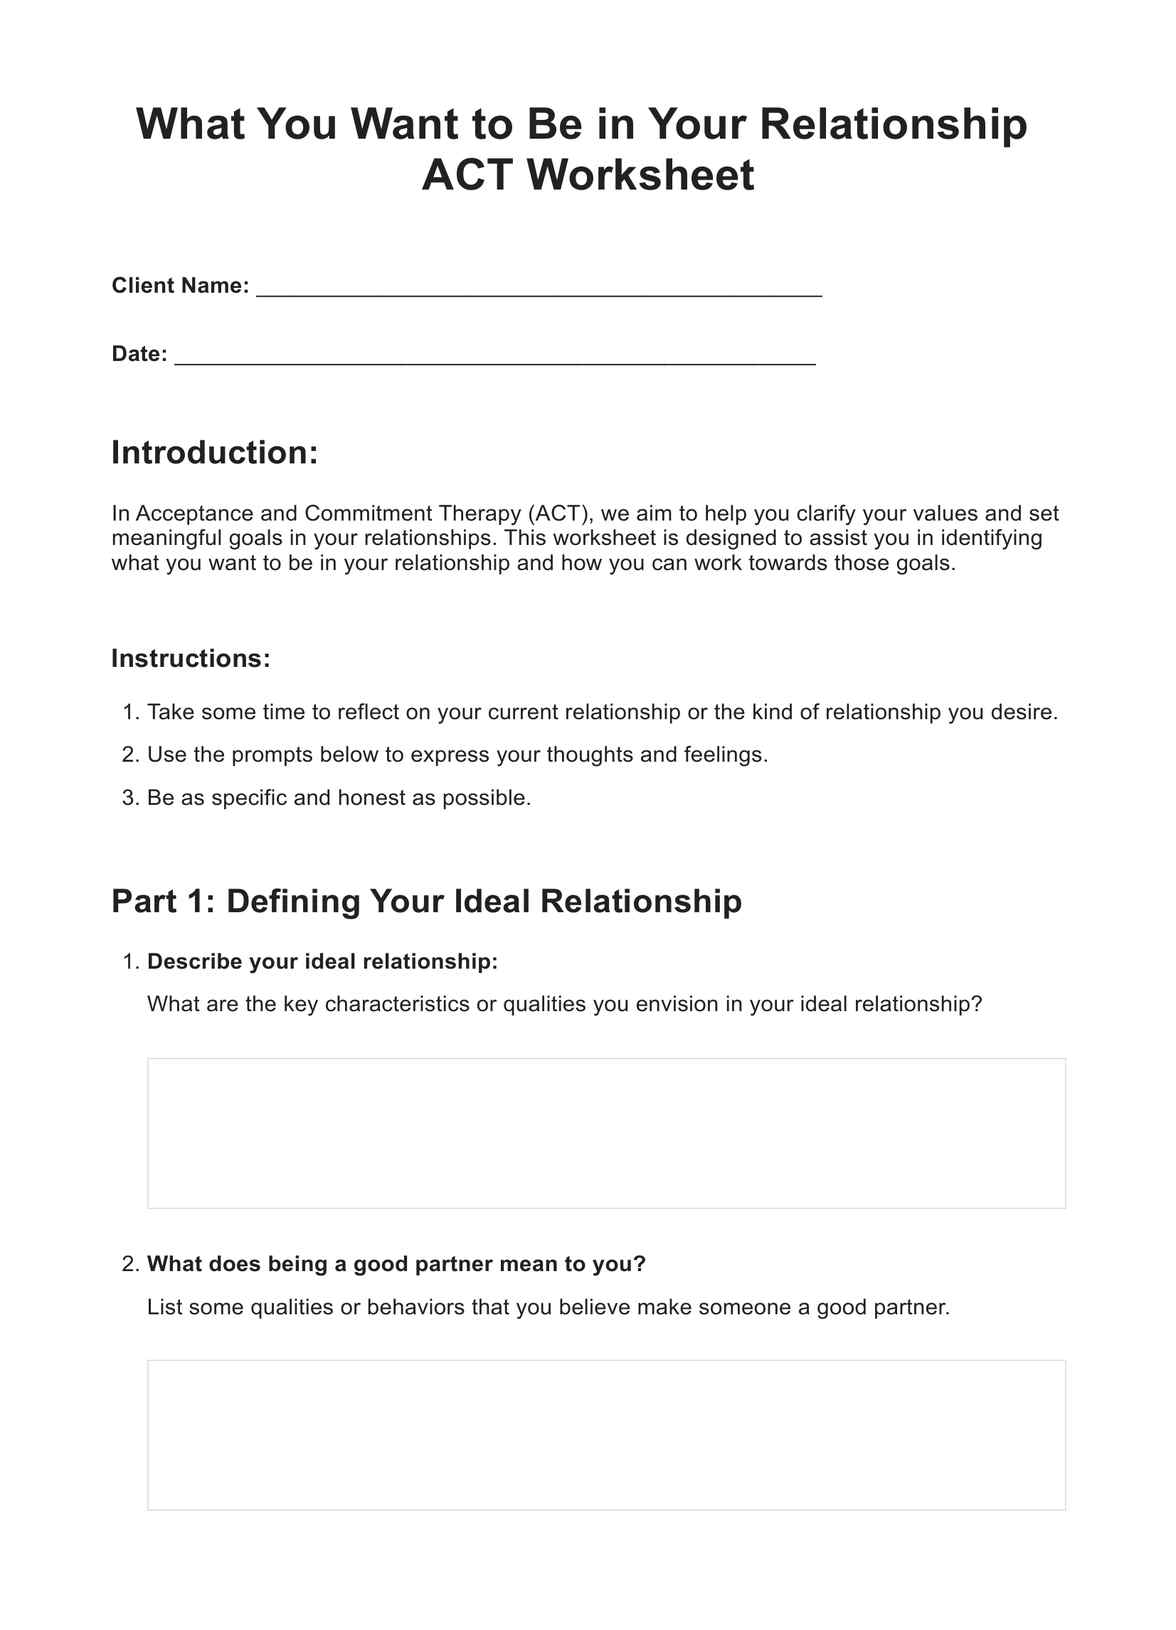 What You Want to Be in Your Relationship ACT Worksheet PDF Example